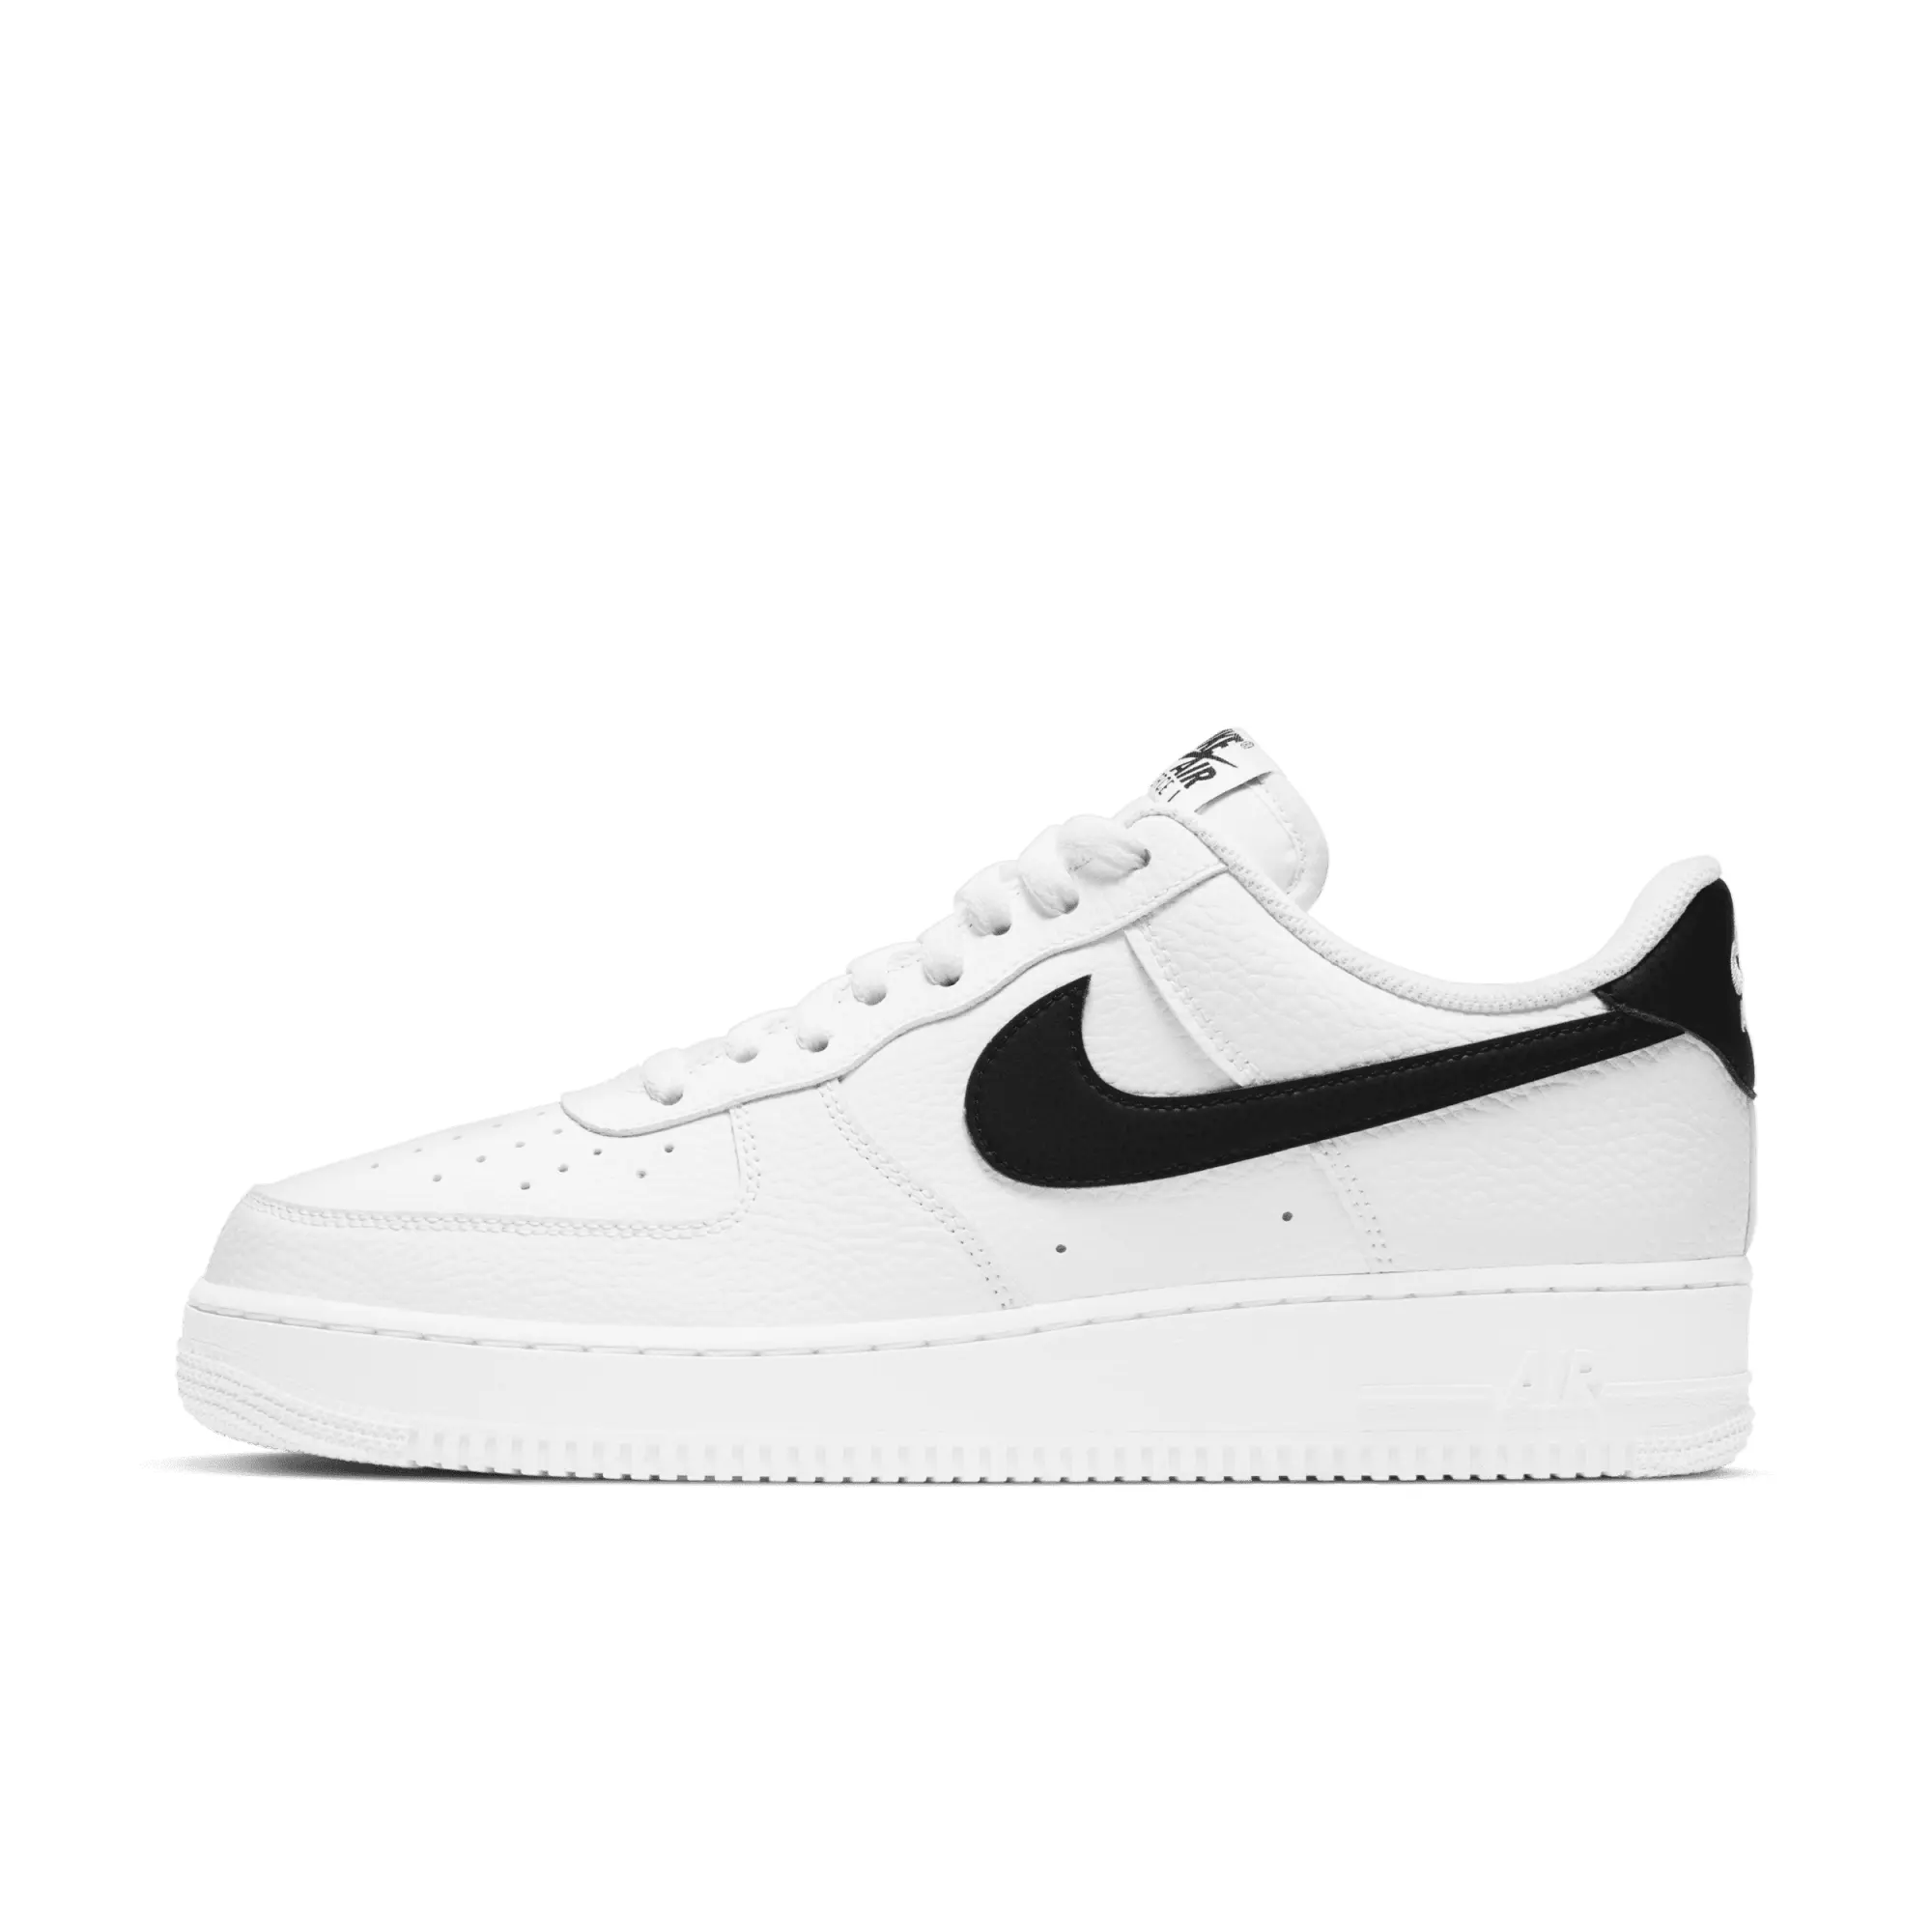 Nike Unisex Air Force 1 '07 AN20 Trainers White/Black Leather